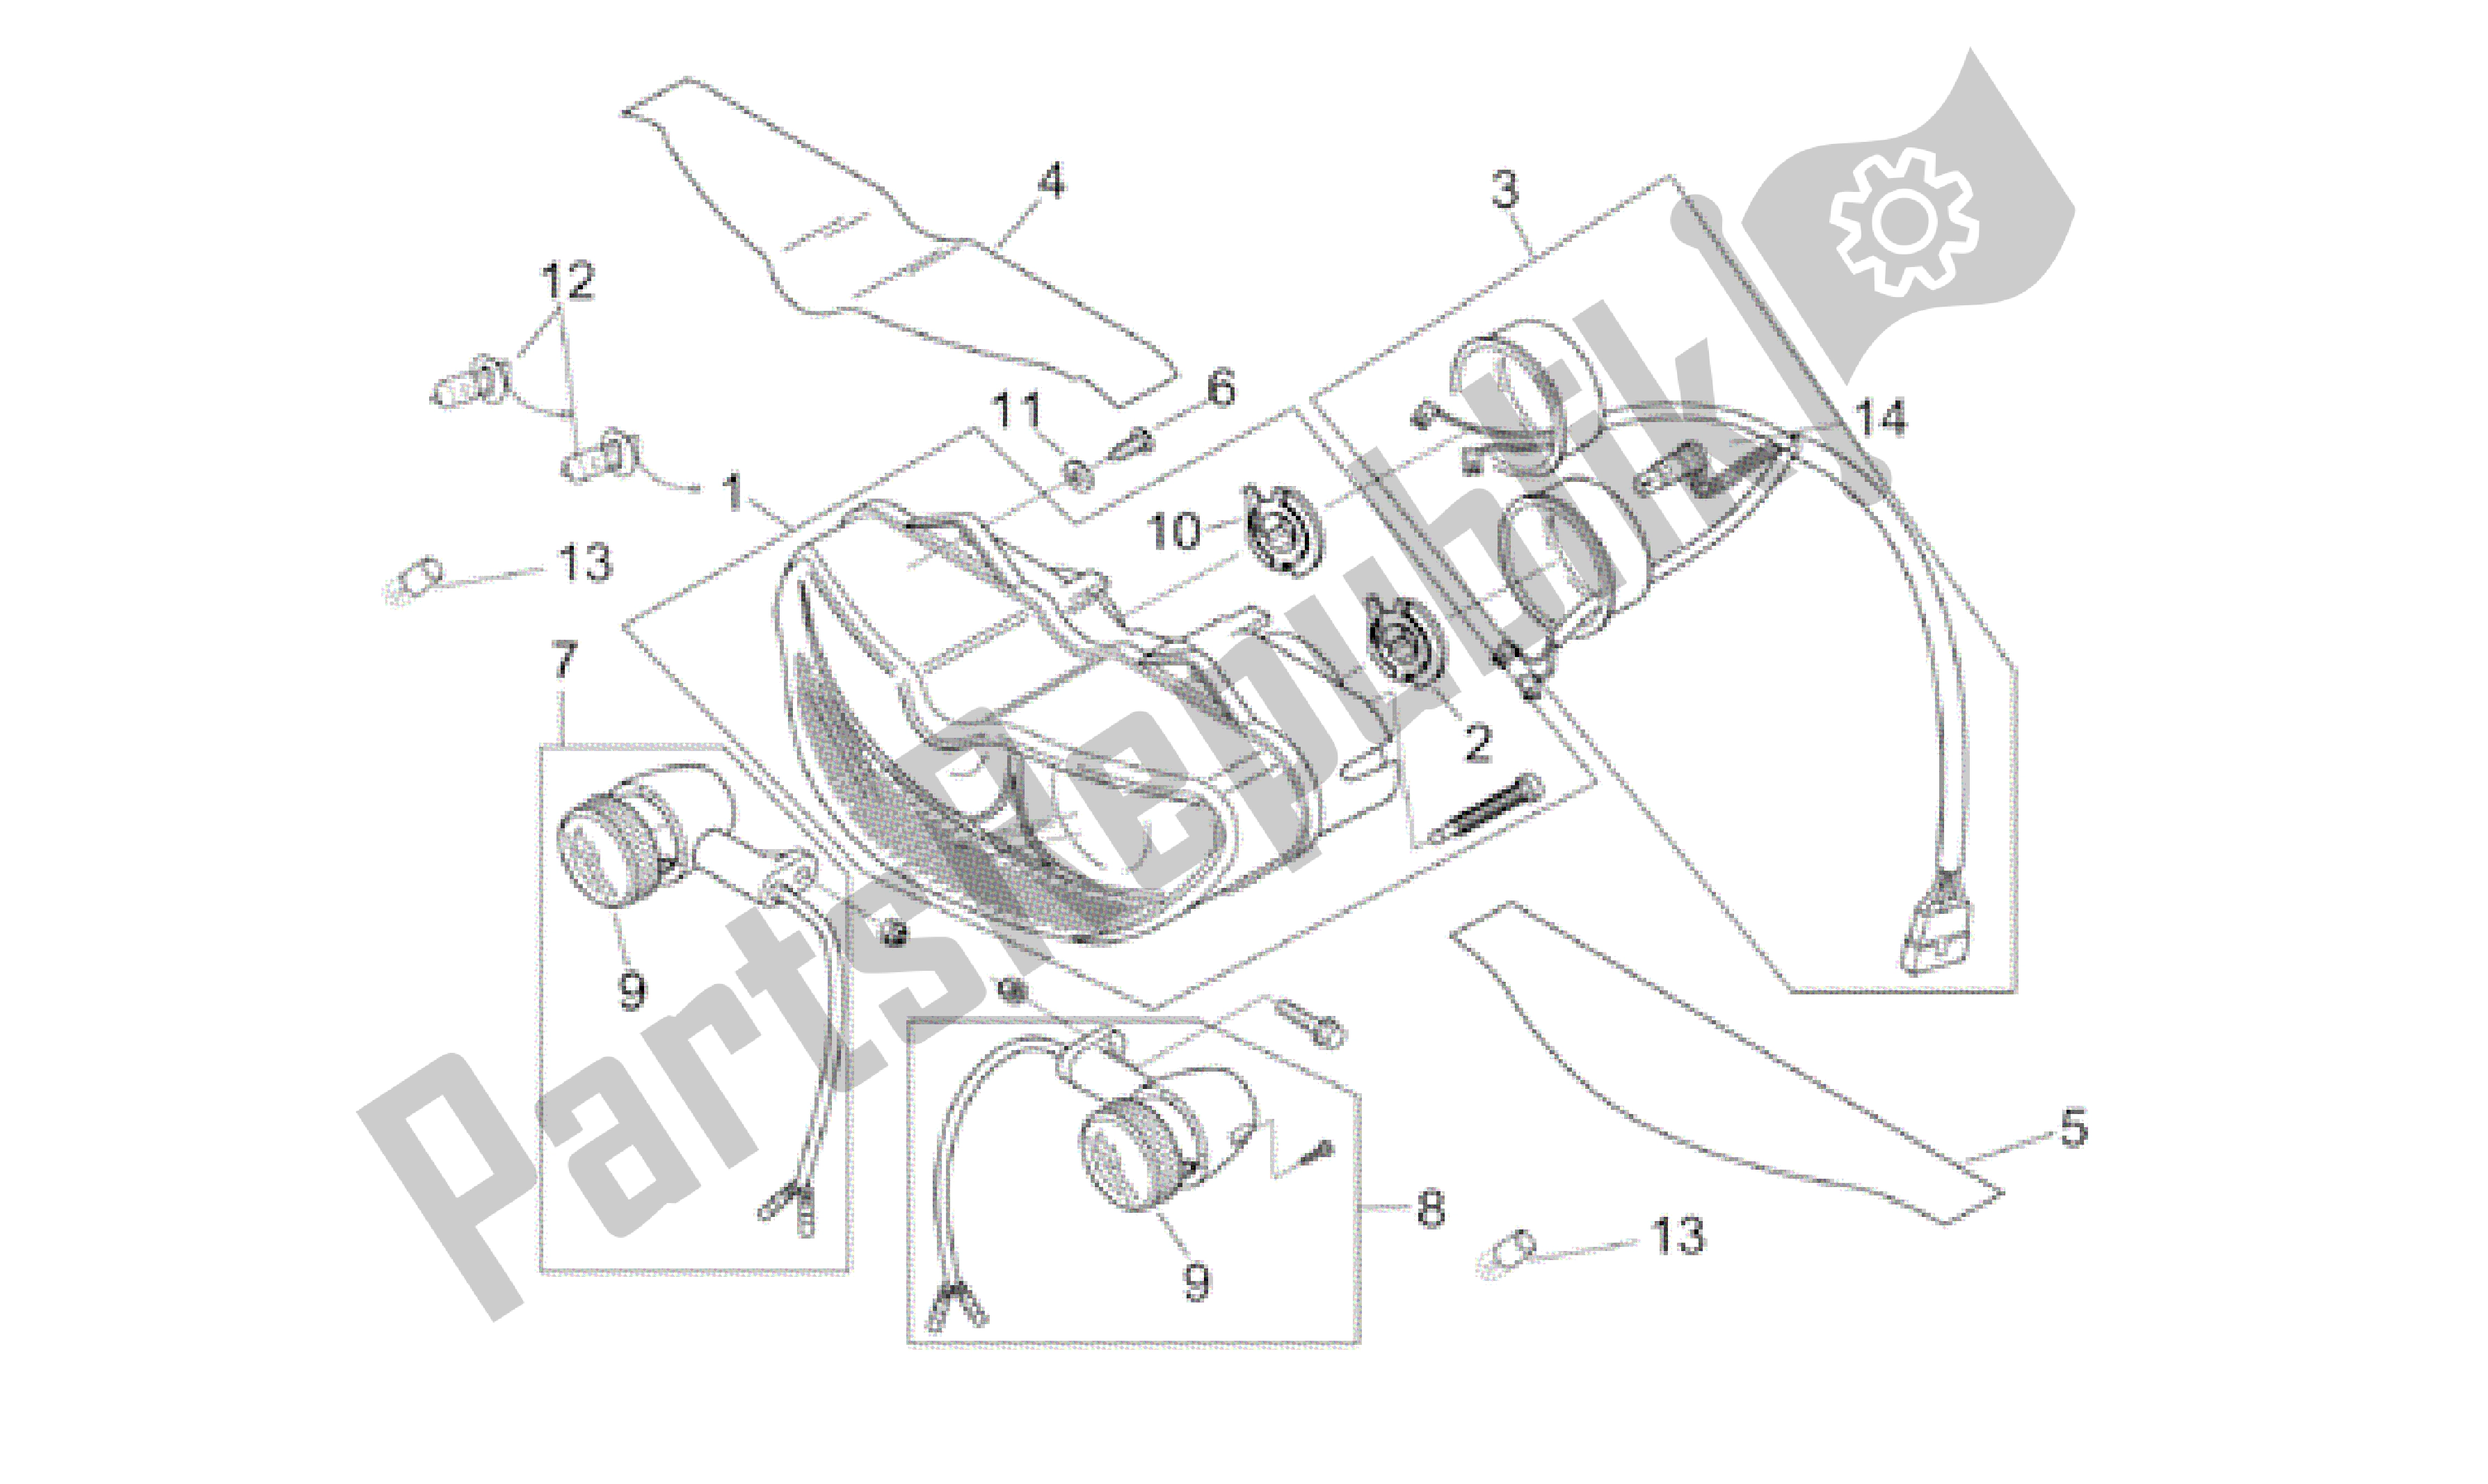 All parts for the Front Lights of the Aprilia RS 50 1999 - 2005